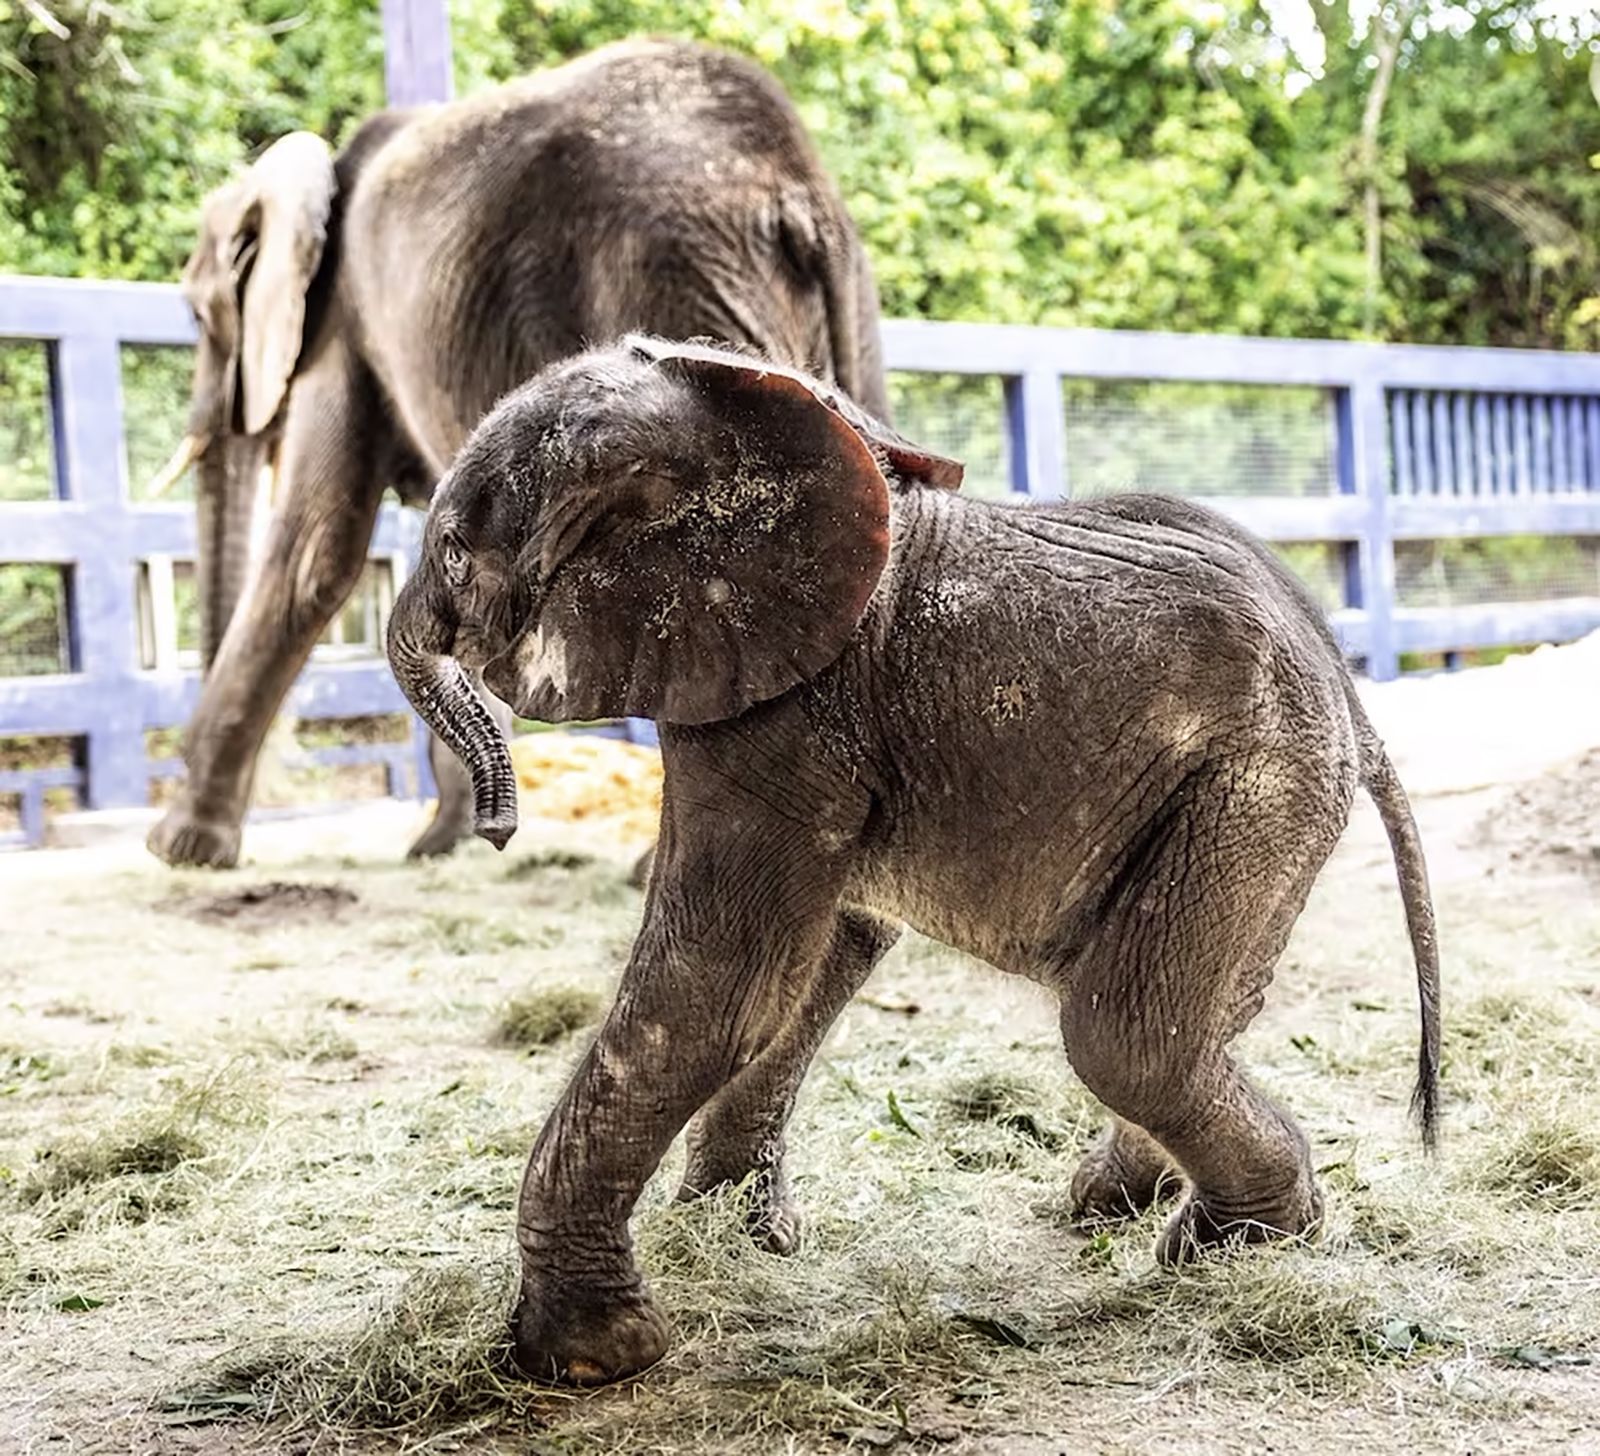 First baby African elephant born at Disney's Animal Kingdom in 7 years,  park says